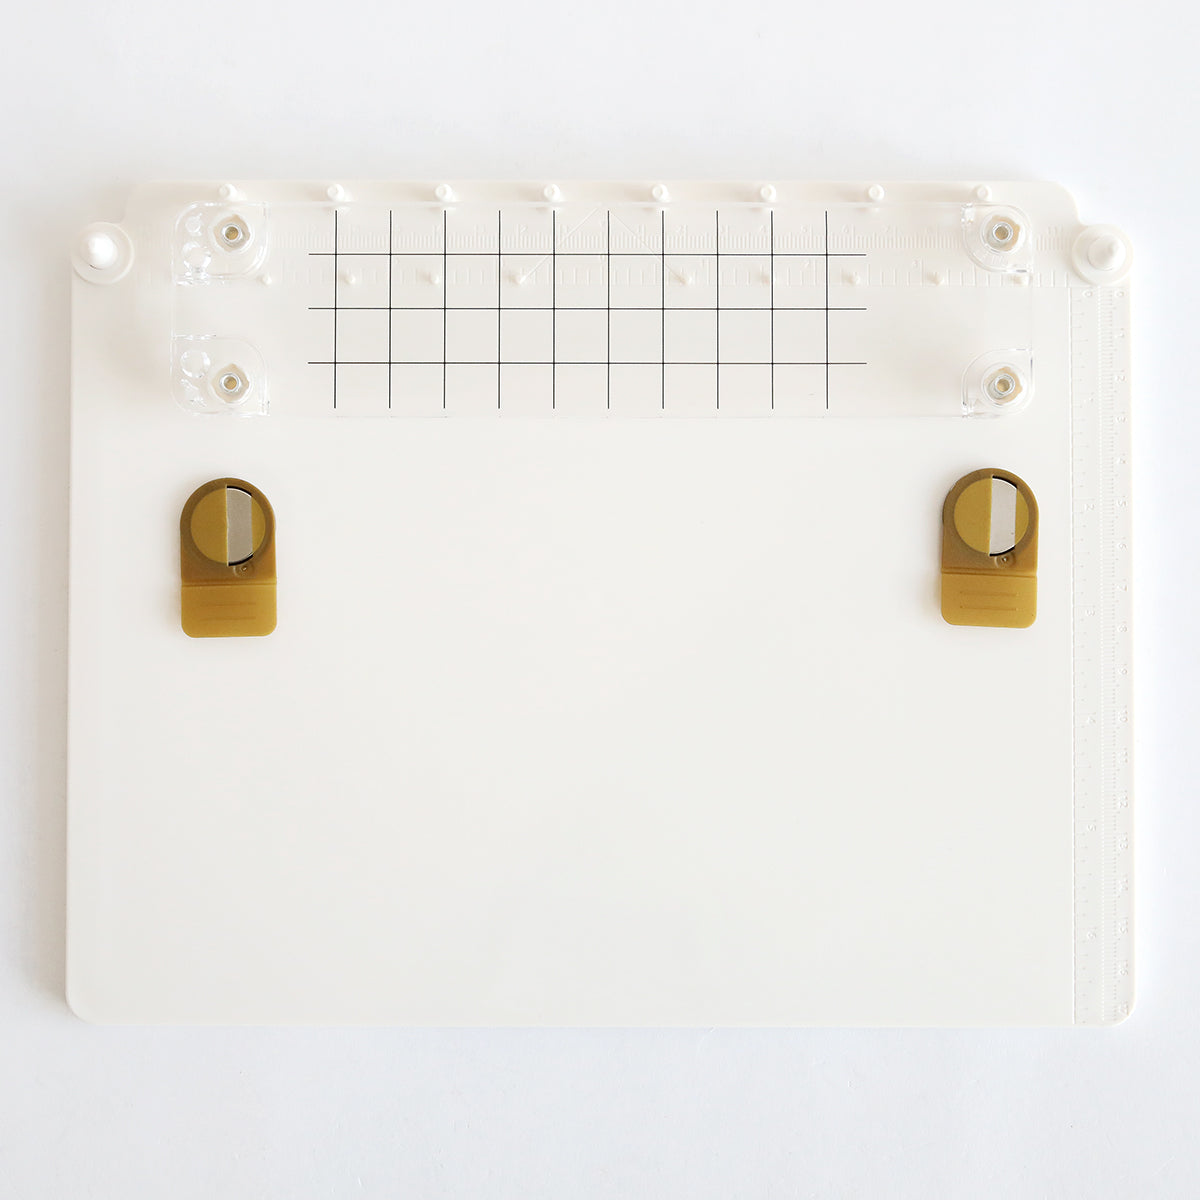 Modified Description: A white board with Stamp Platform and Alignment Tool cling stamps attached to it.